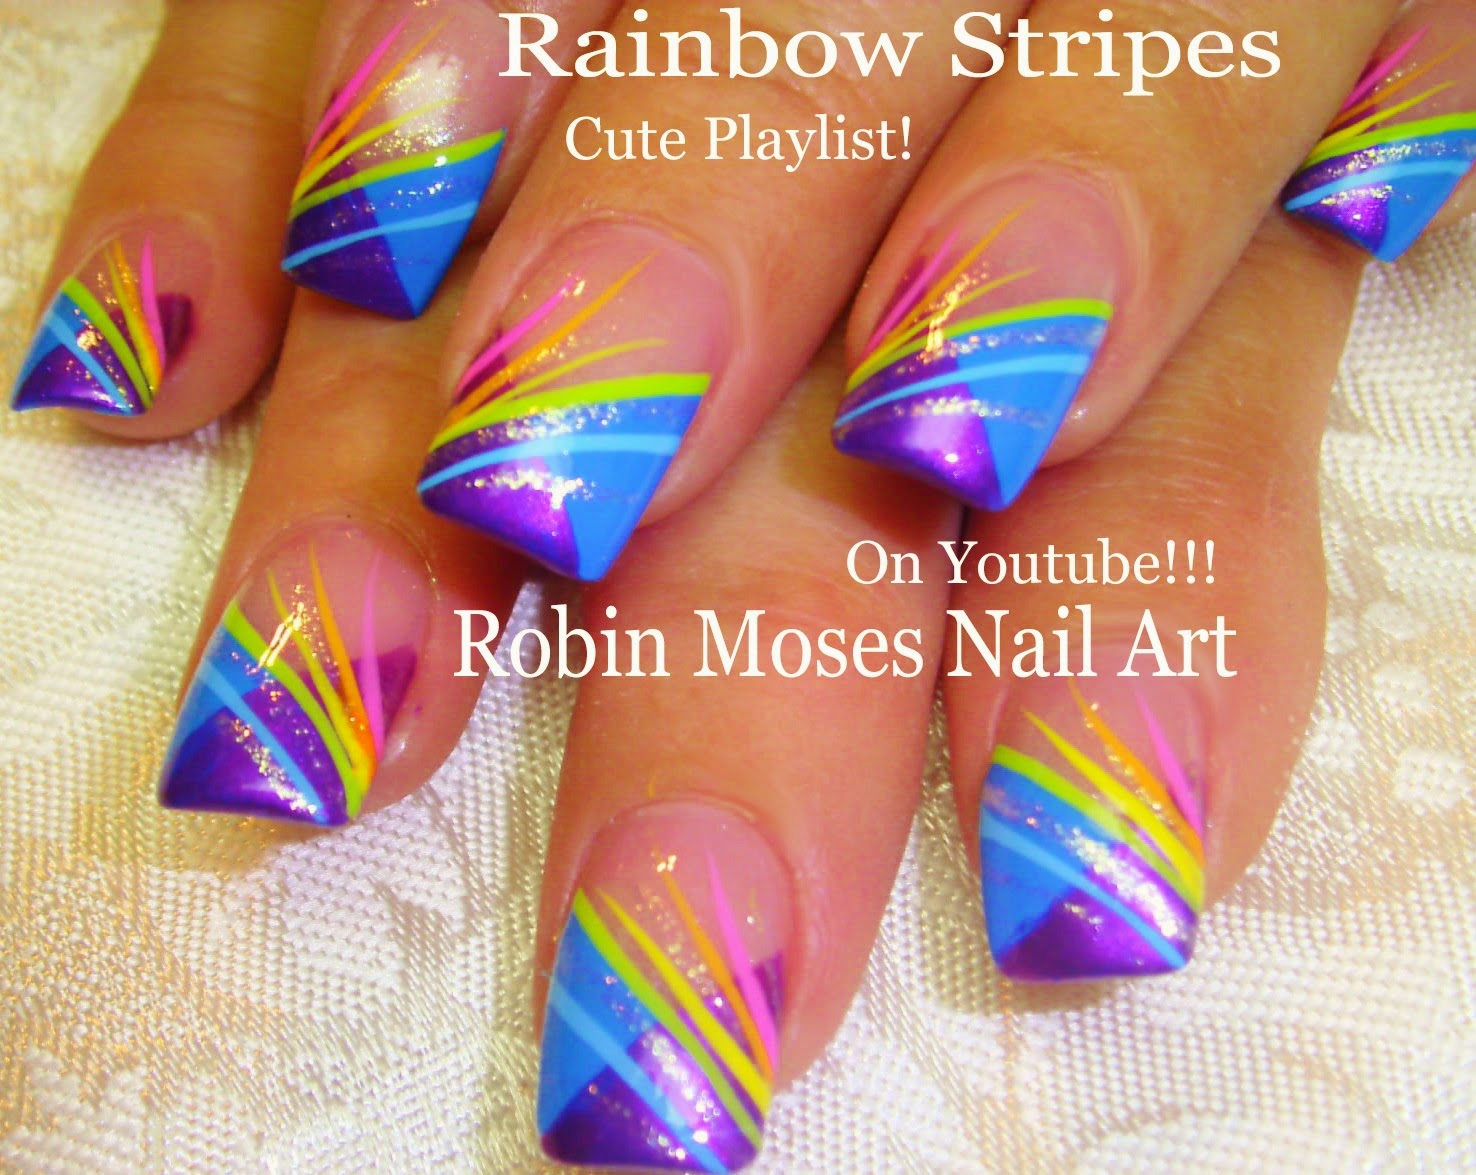 10. "Colorful Striped Nail Art Tutorial" - wide 9